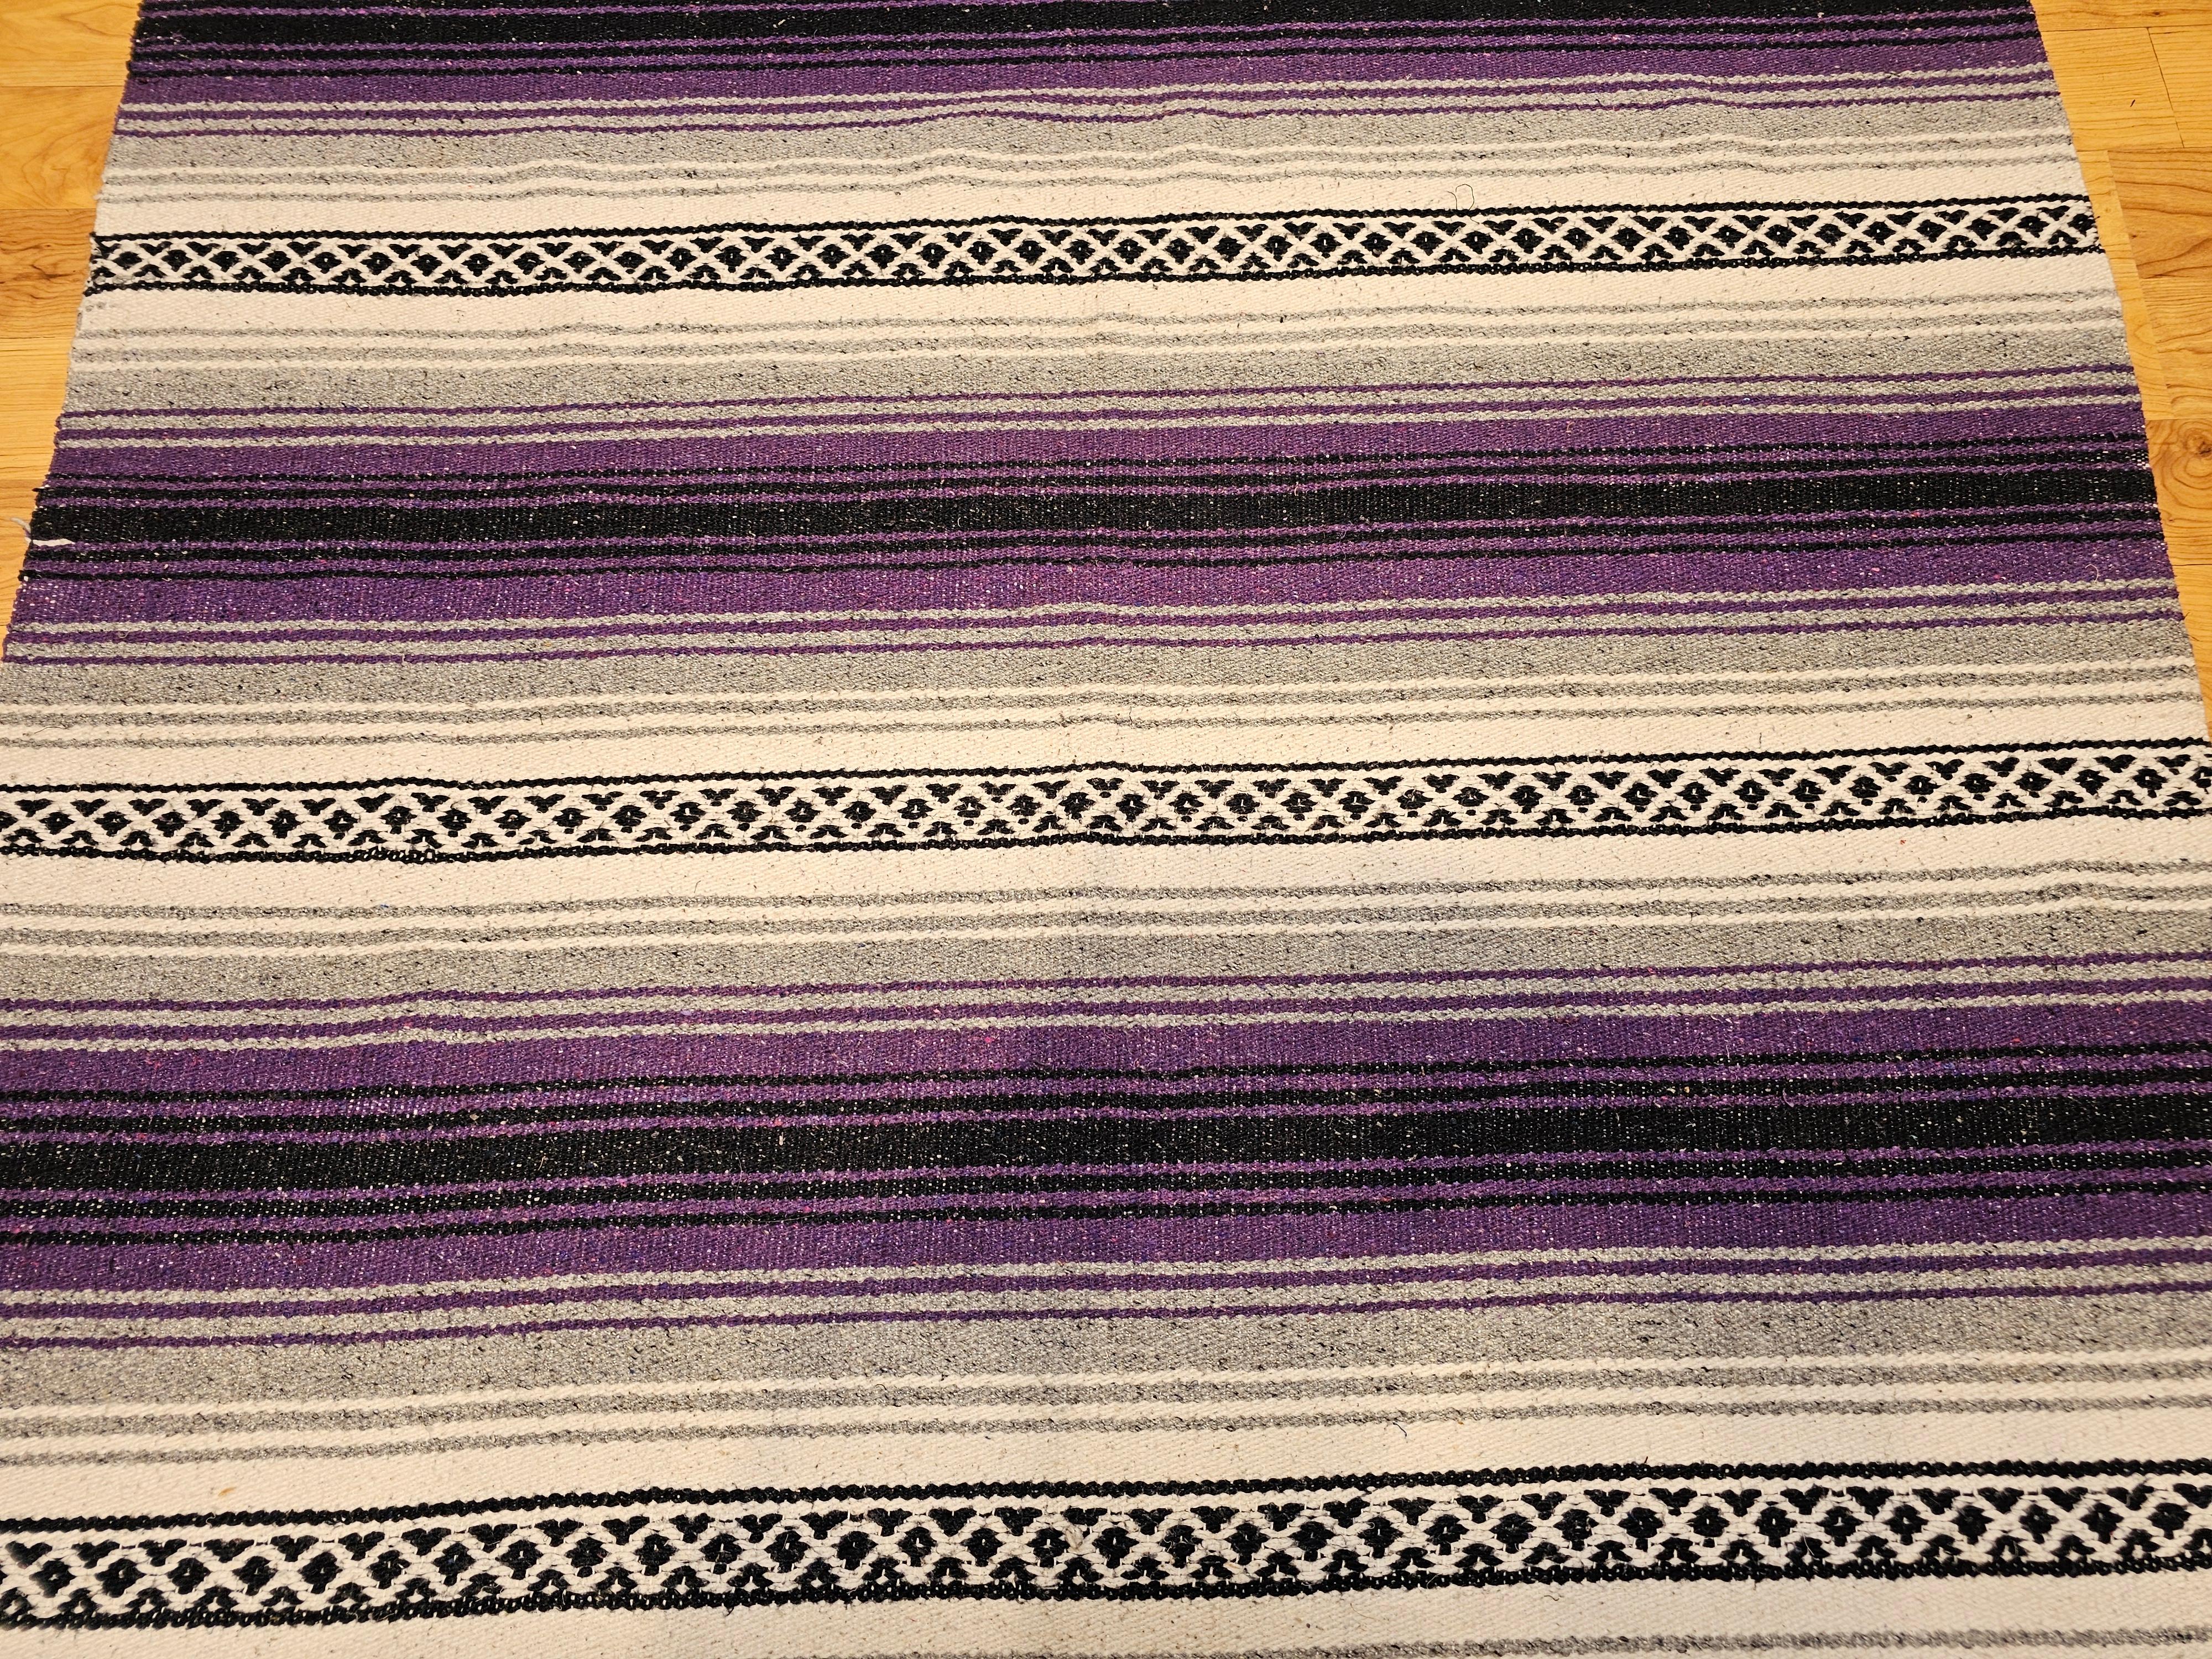 Vintage American Southwestern Kilim in Lavender, Black, Gray, Ivory In Good Condition For Sale In Barrington, IL